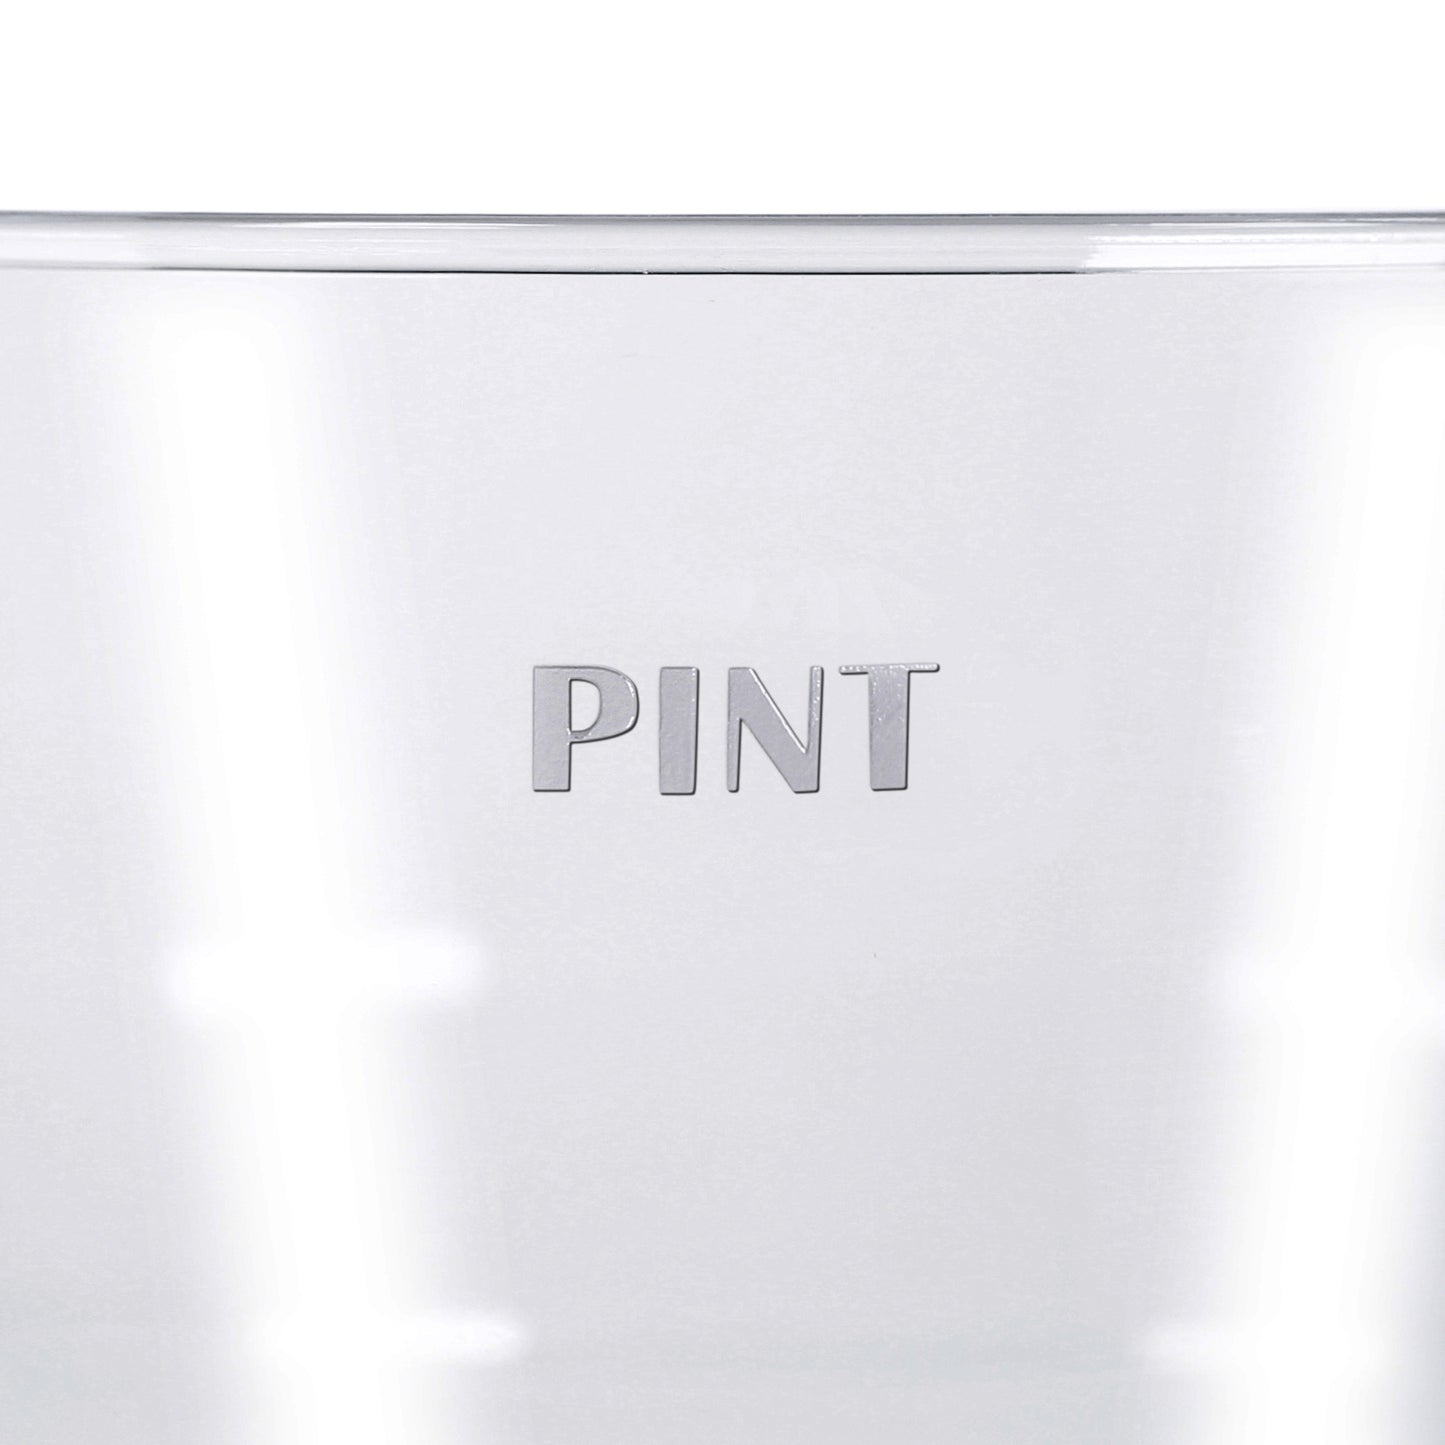 10 x Pint Glasses 568ml Transparent Clear Strong Reusable Plastic CE Marked Beer Cider Lager Drinks Stackable Dishwasher-5056020108504-PCUP-PINTx10-Product Pro-Clear, Pint, Pint Glasses, Plastic Pint Glasses